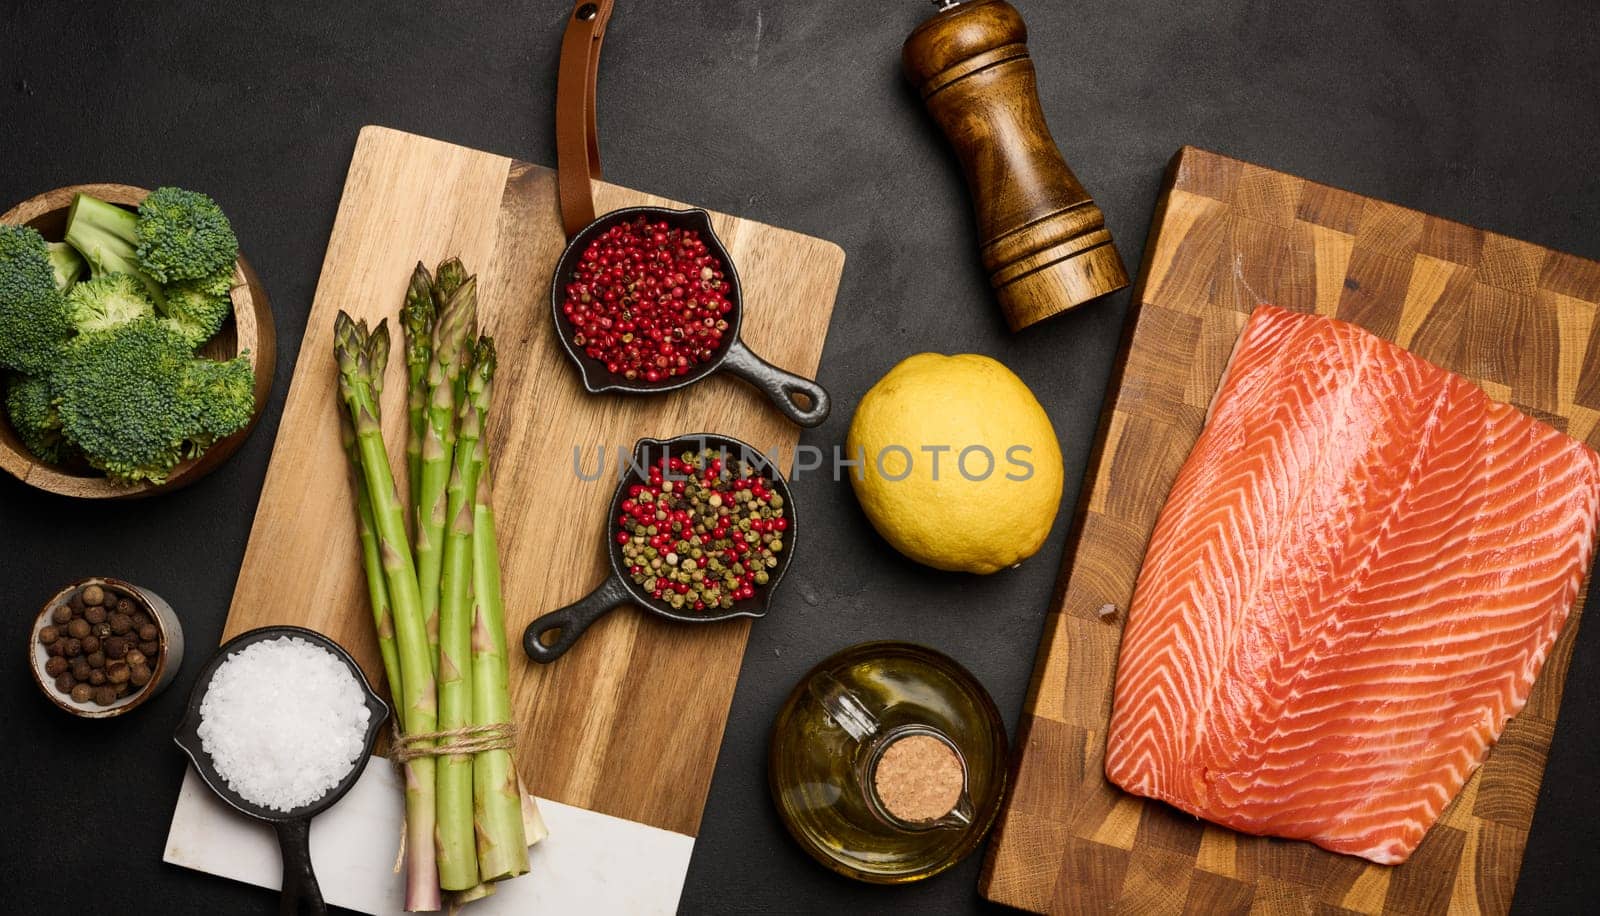 A piece of raw trout fillet on a wooden board, next to asparagus and broccoli. by ndanko